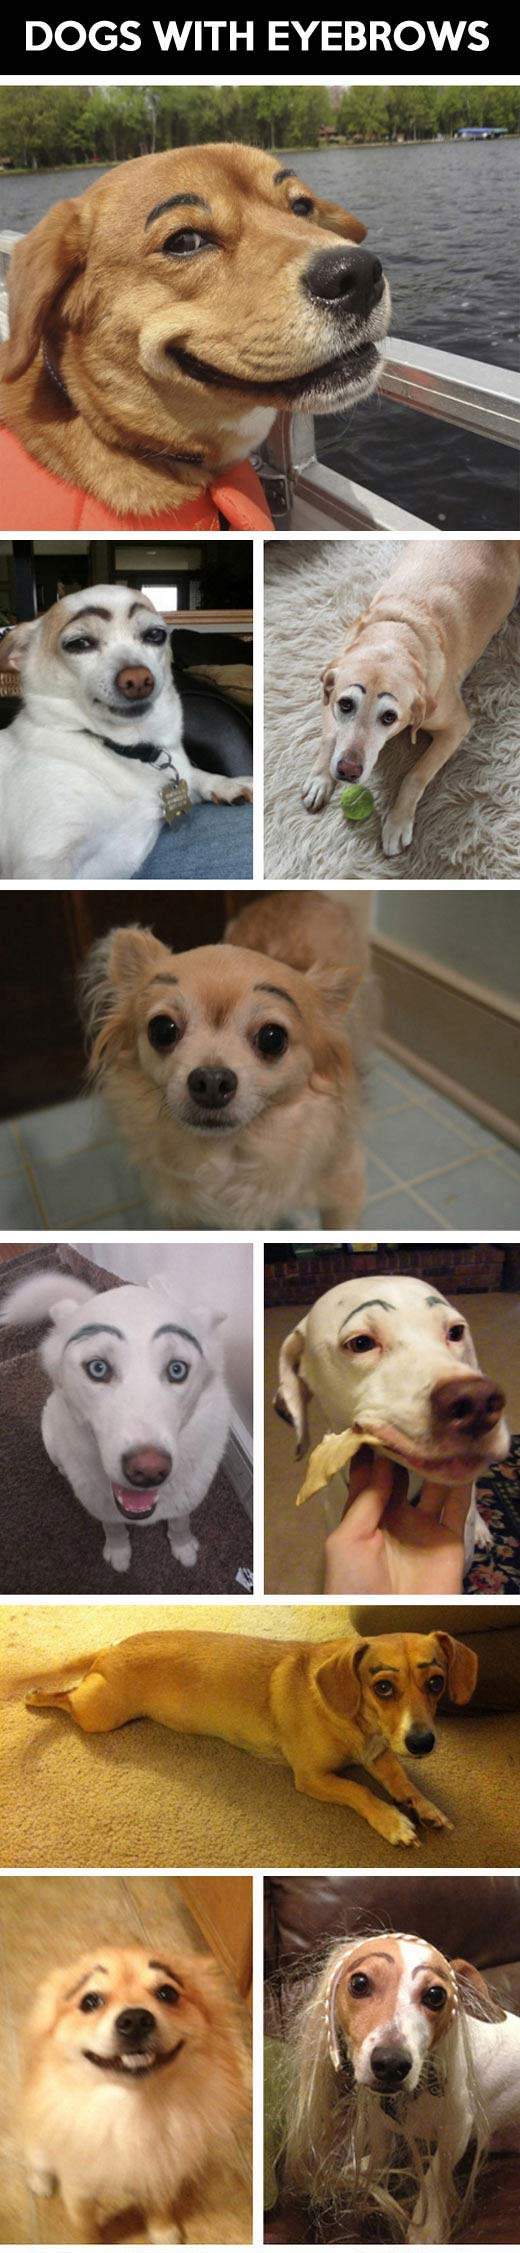 Dogs with eyebrows.